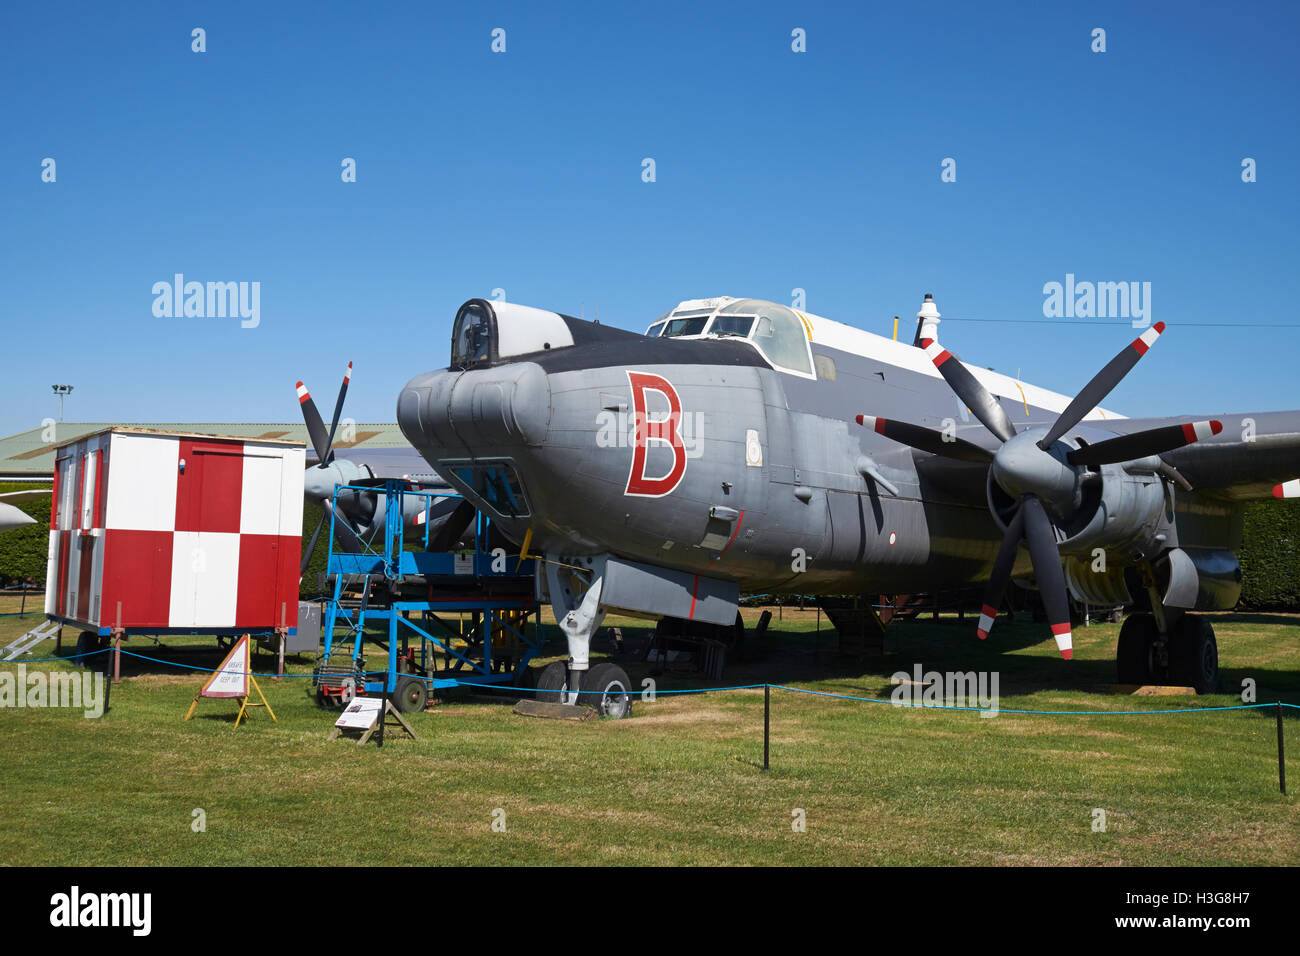 An Avro Shackleton Mk.3 Phase 3 maritime patrol aircraft on display at the Newark Air Museum, Nottinghamshire, England. Stock Photo